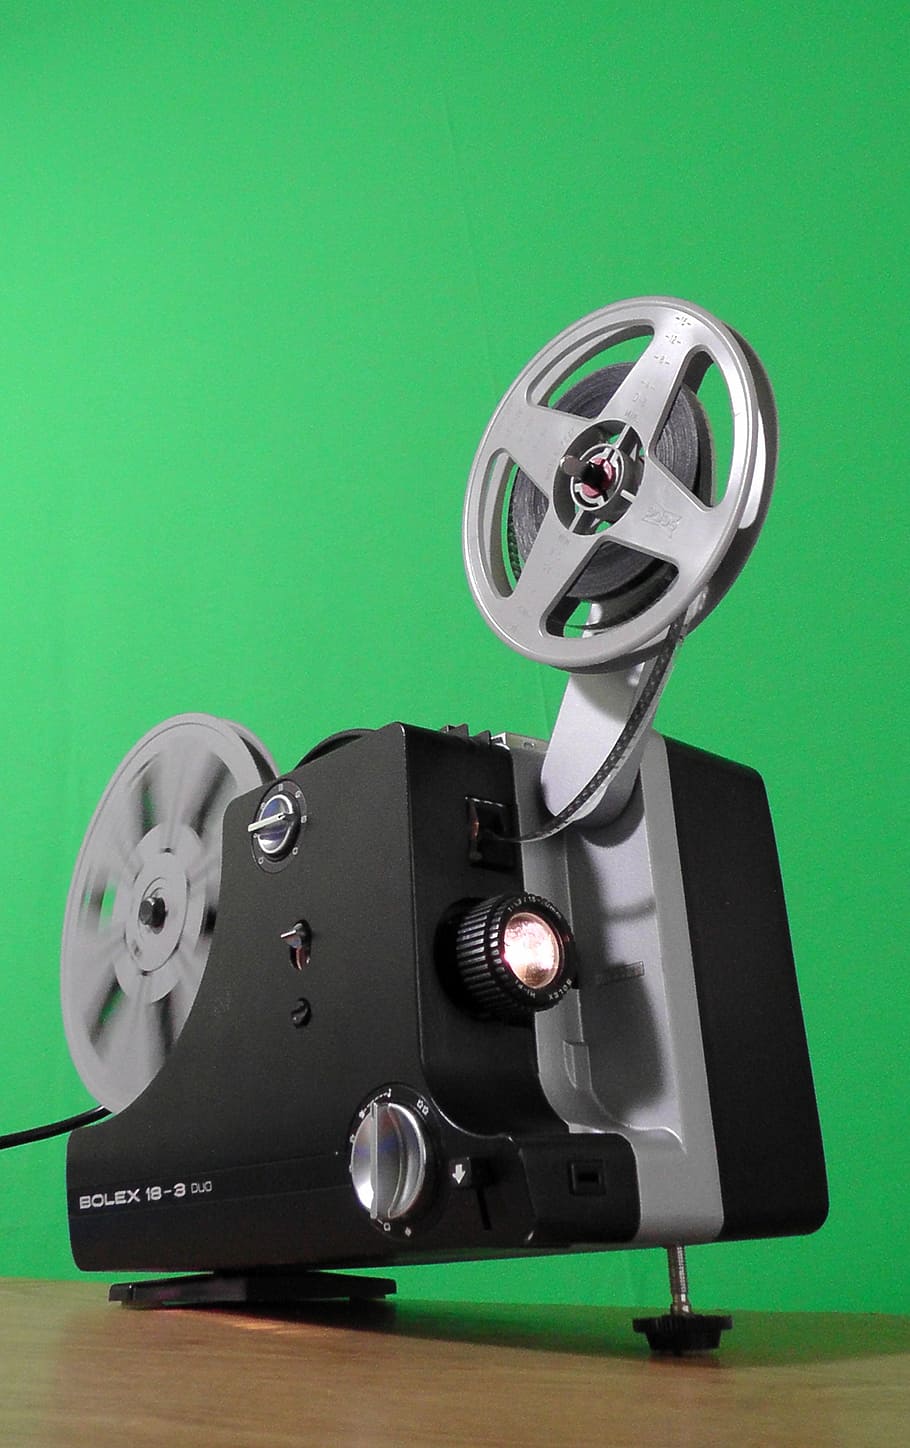 black, gray, reel camera, projector, cinema, coil, film, projection, collection movies, home movies